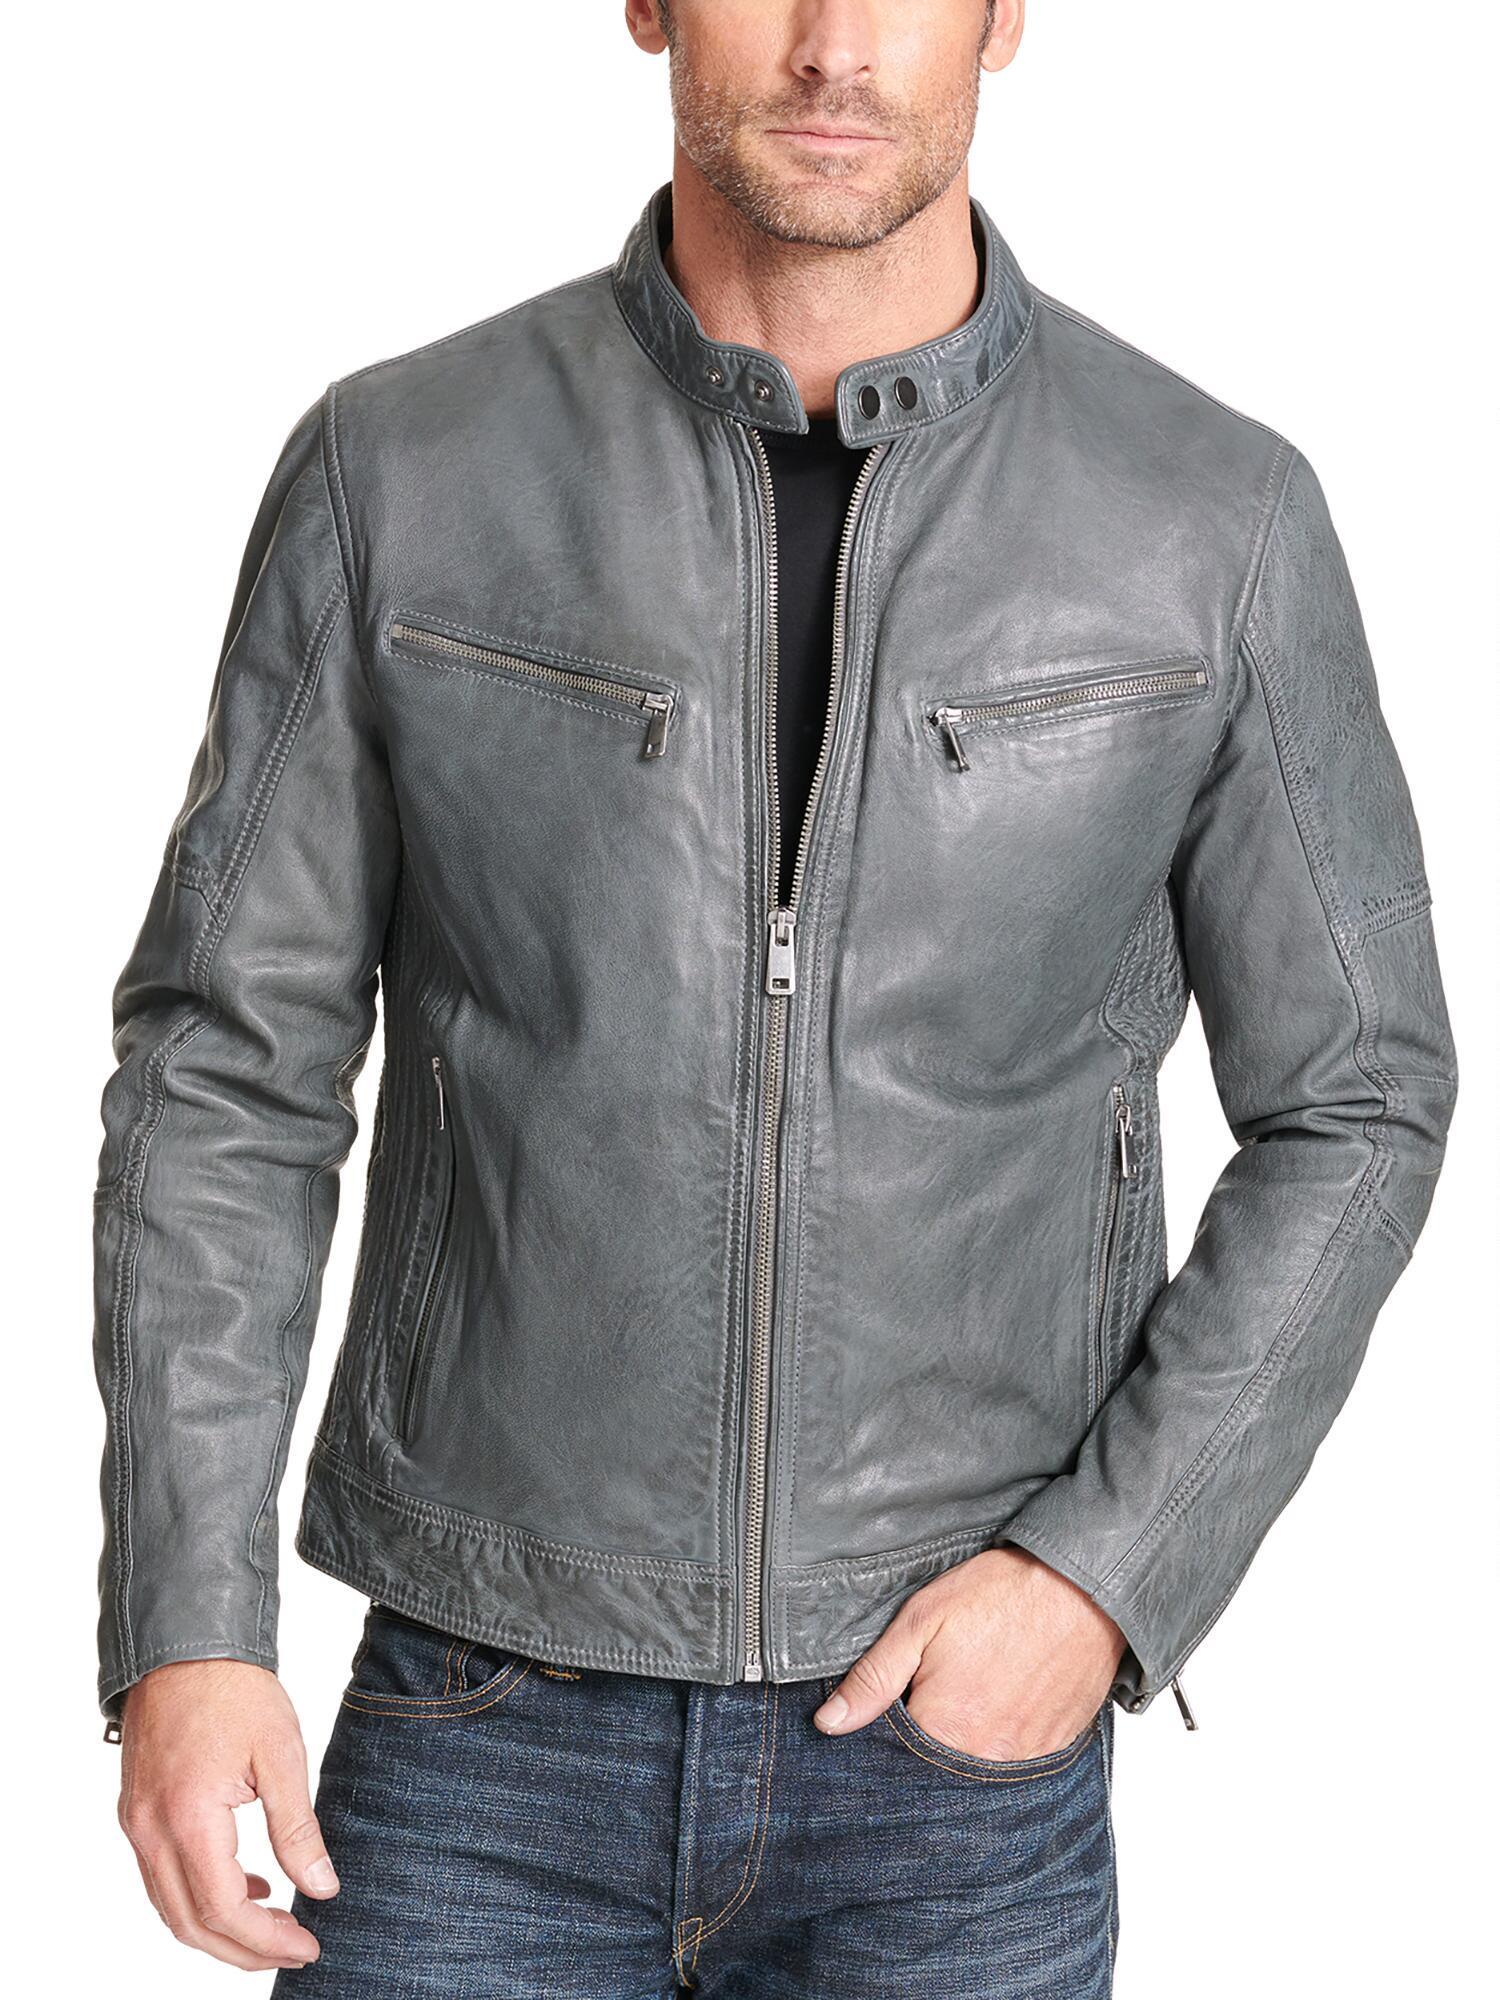 Wilsons Leather Brent Leather Moto Jacket in Grey (Gray) for Men - Lyst